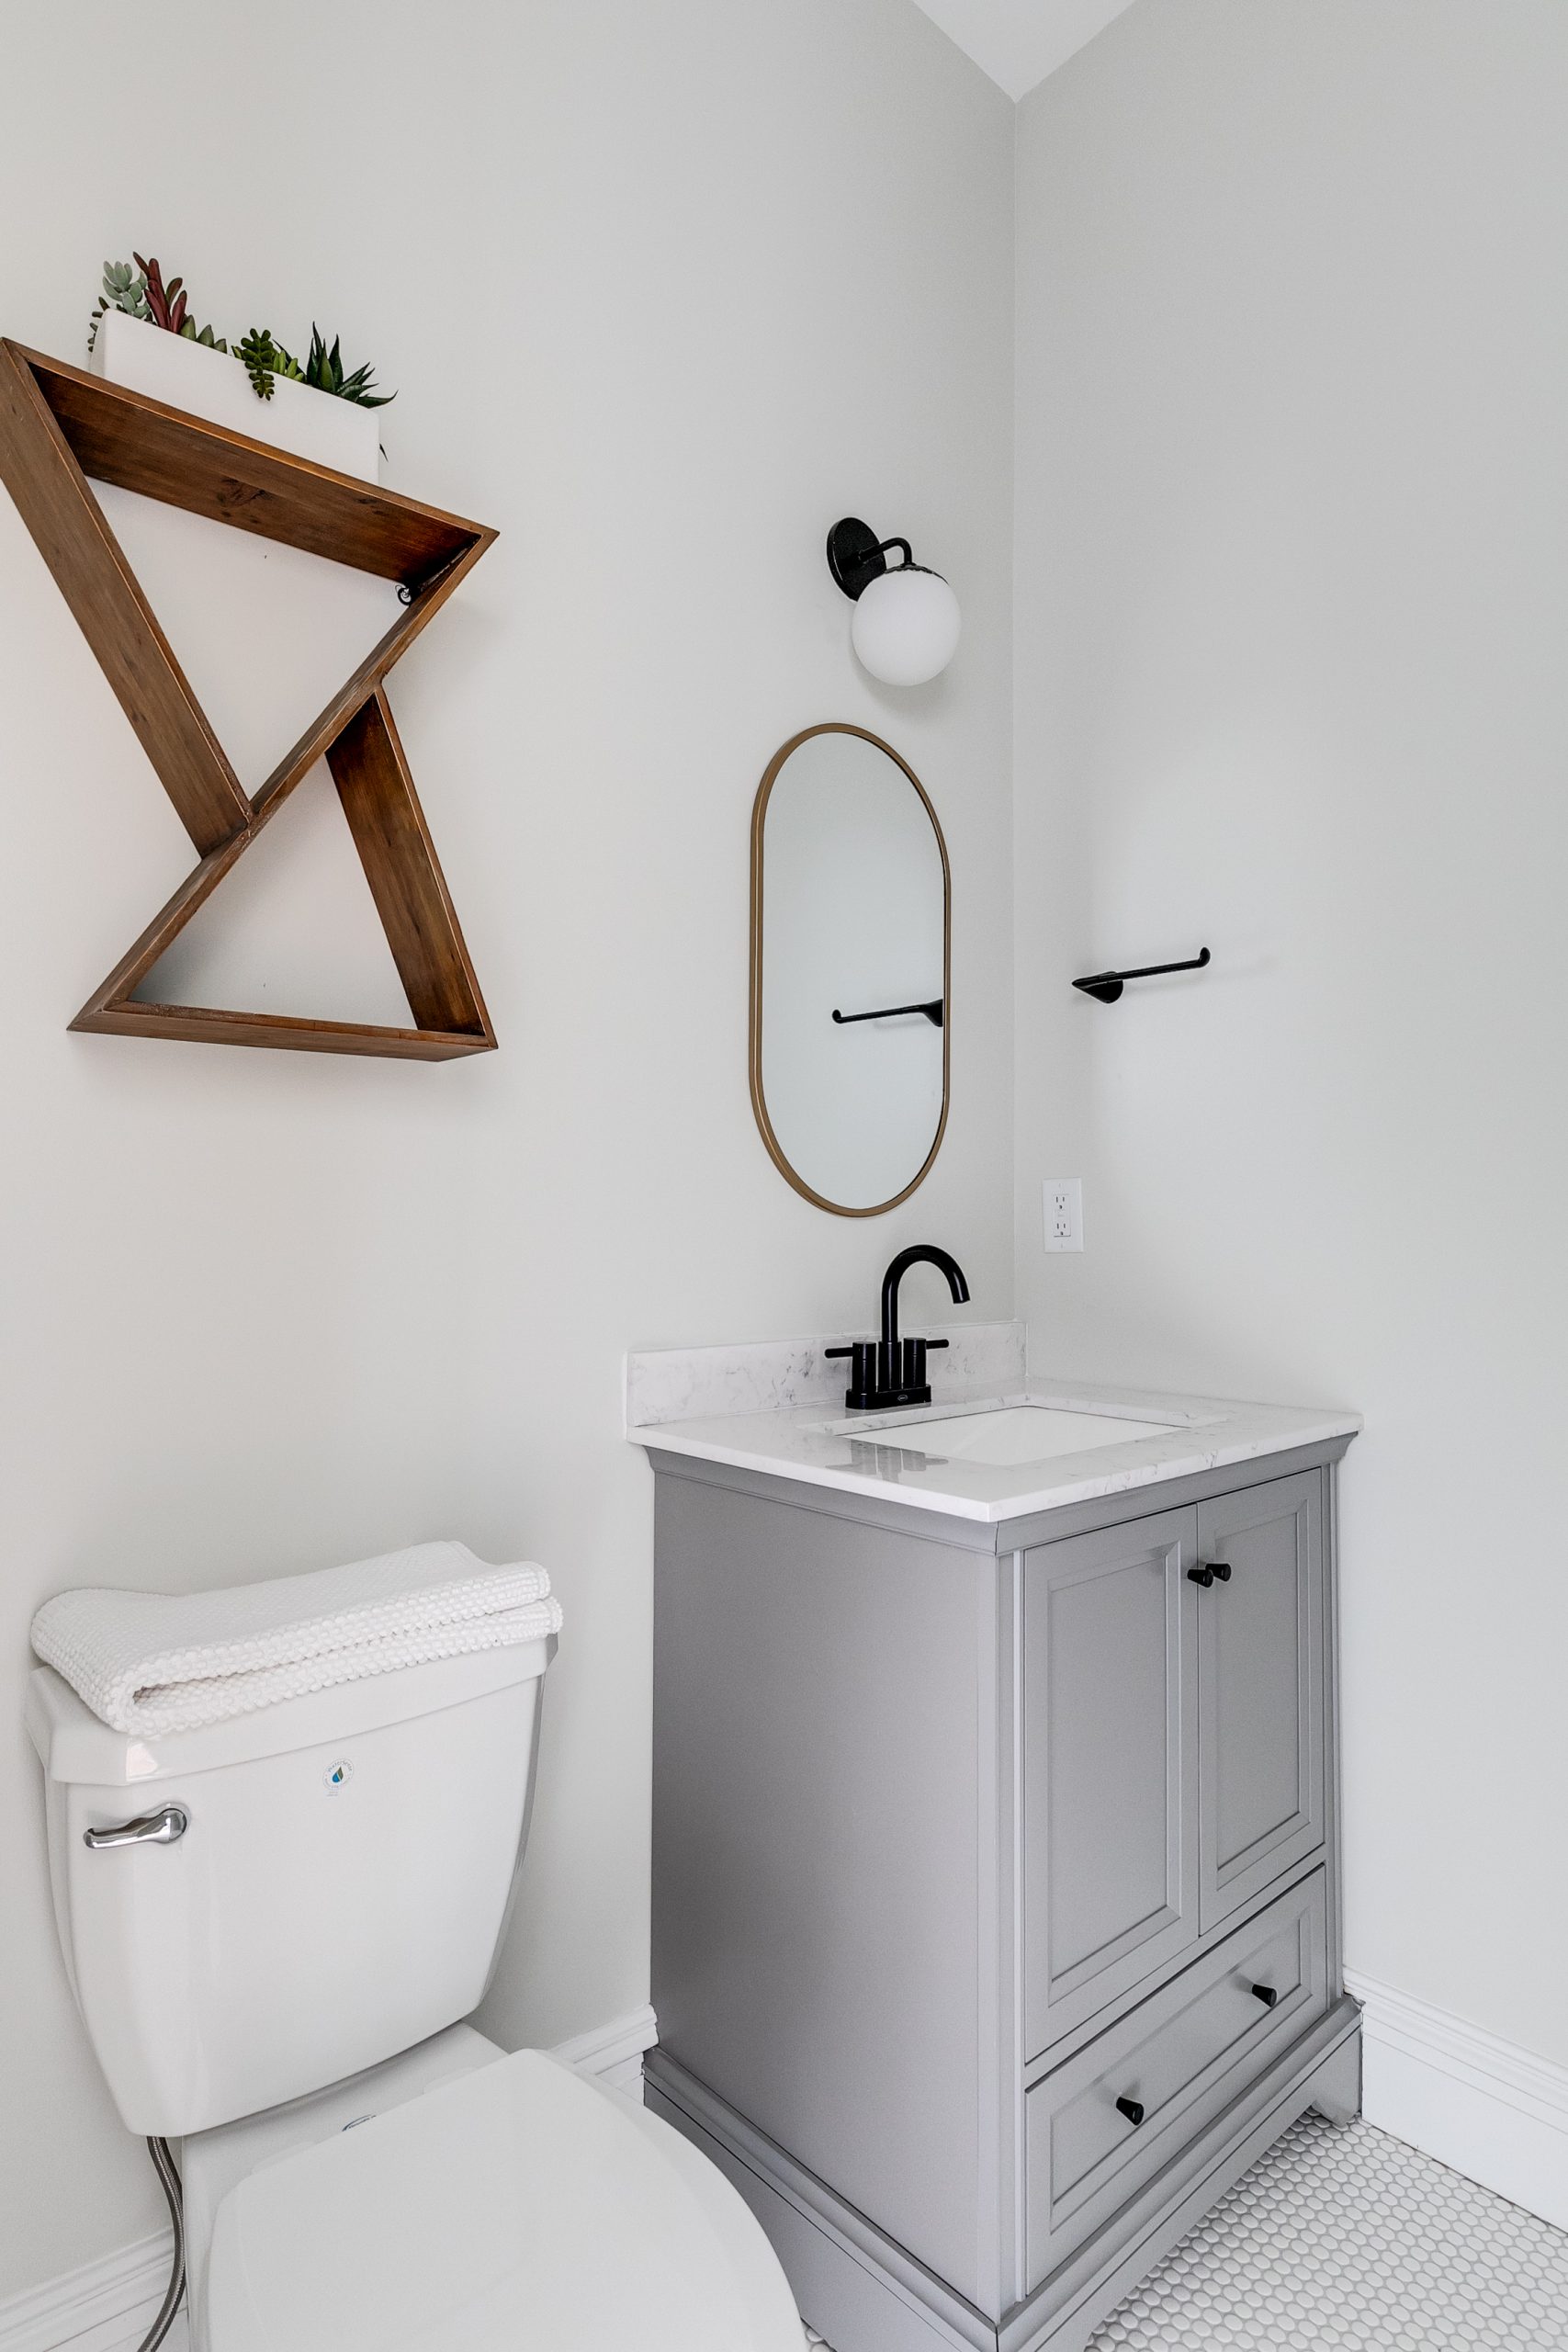 A modern white bathroom with a grey vessel sink furnished with black metal hardware.